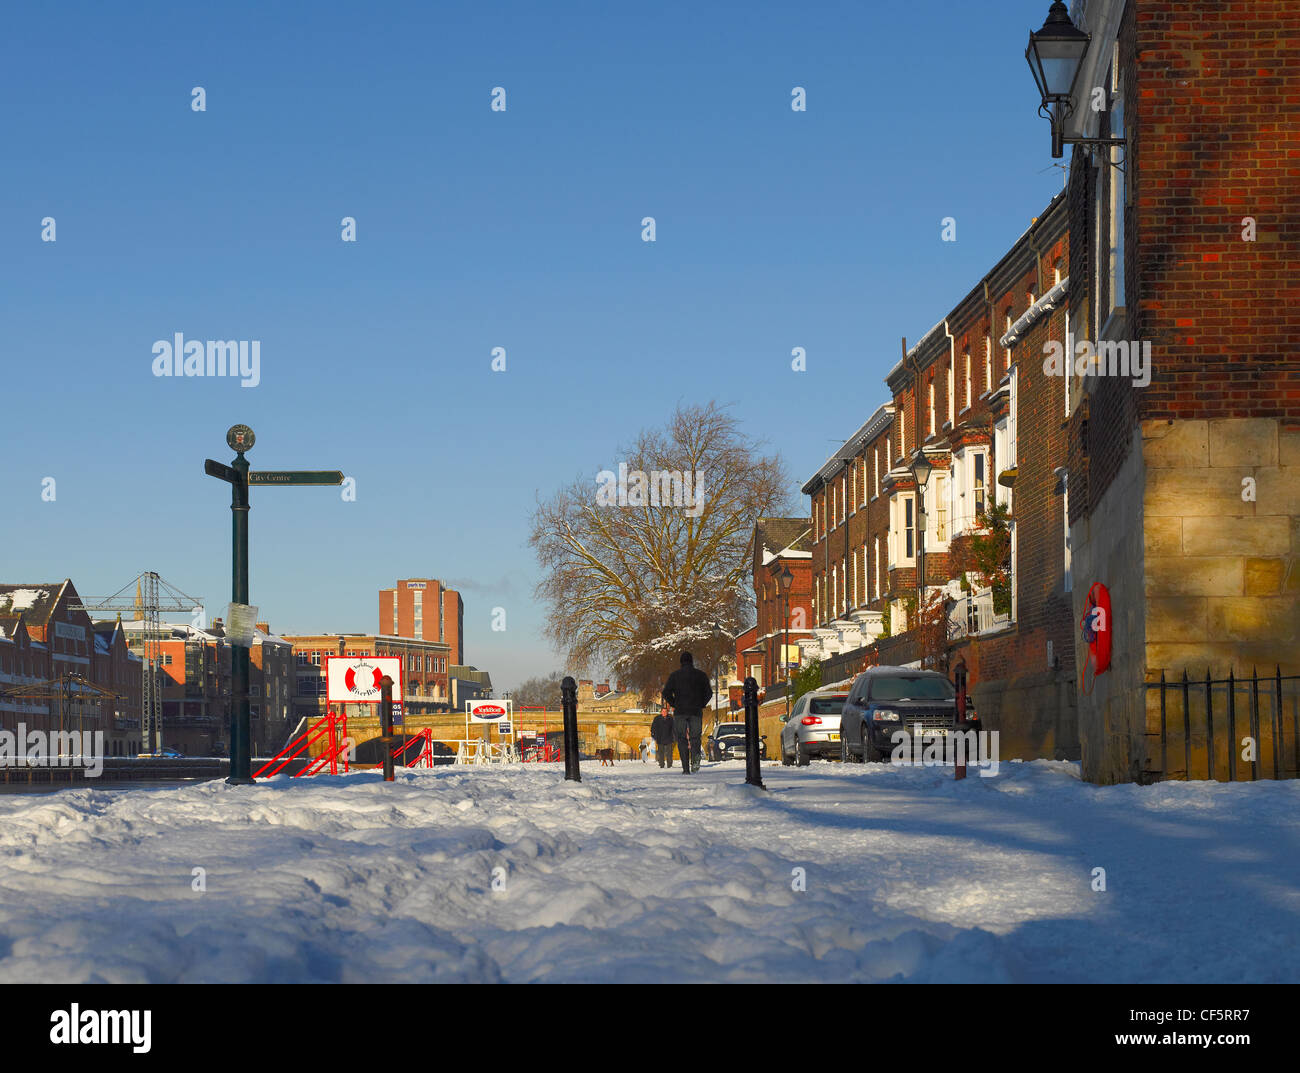 Snow covering the South Esplanade by the River Ouse in winter. Stock Photo